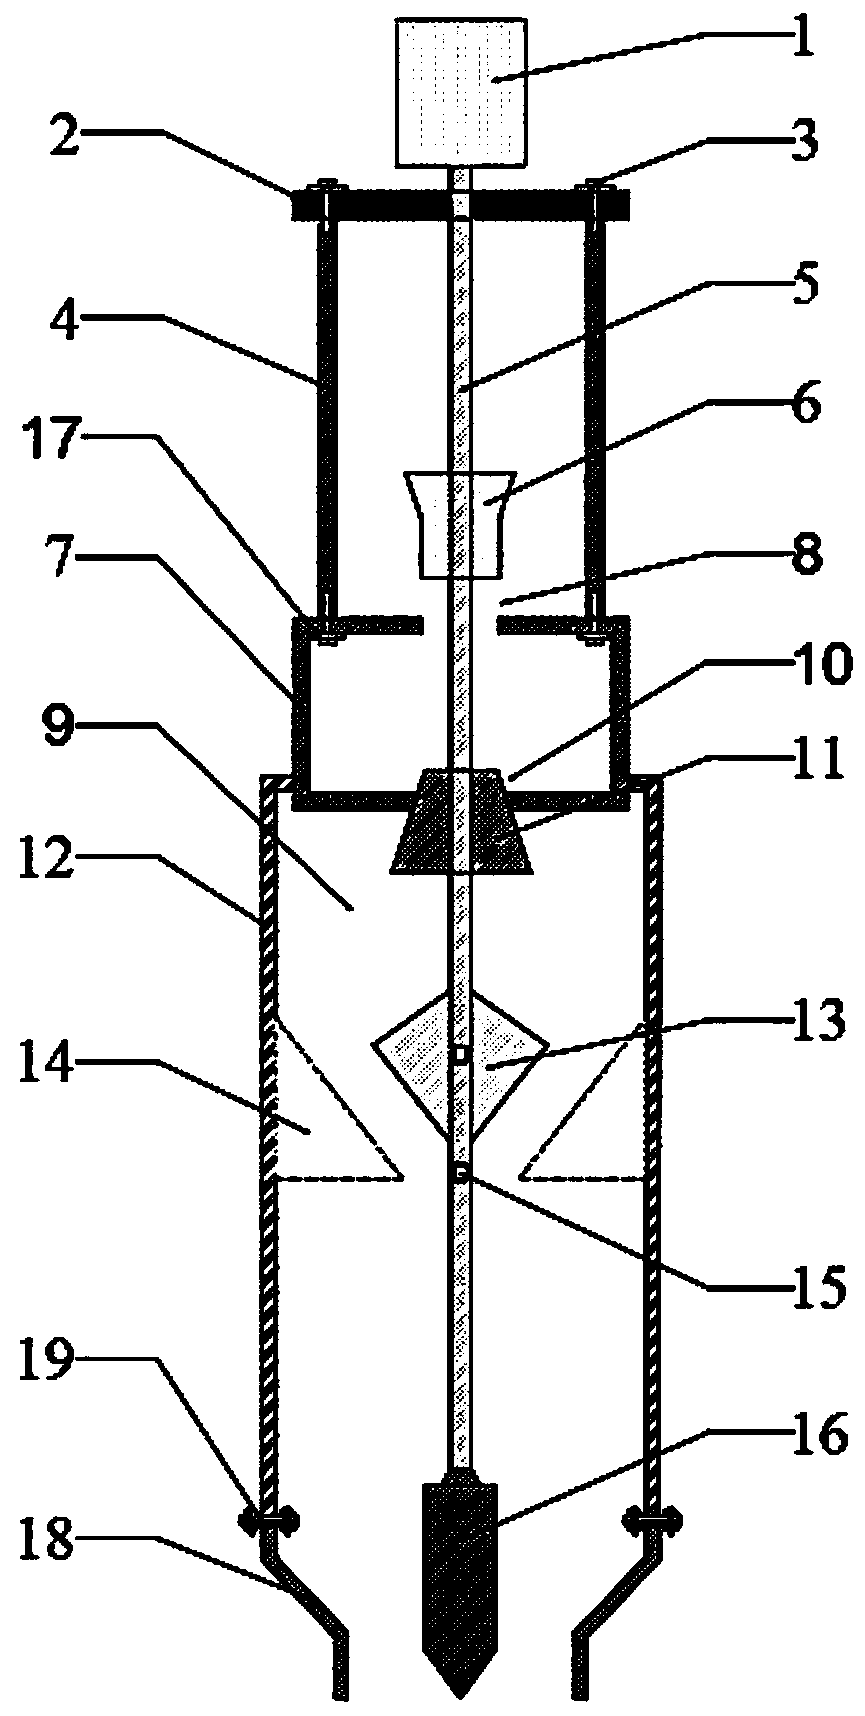 An integrated device for shelling and unloading aluminum electrolytic cell